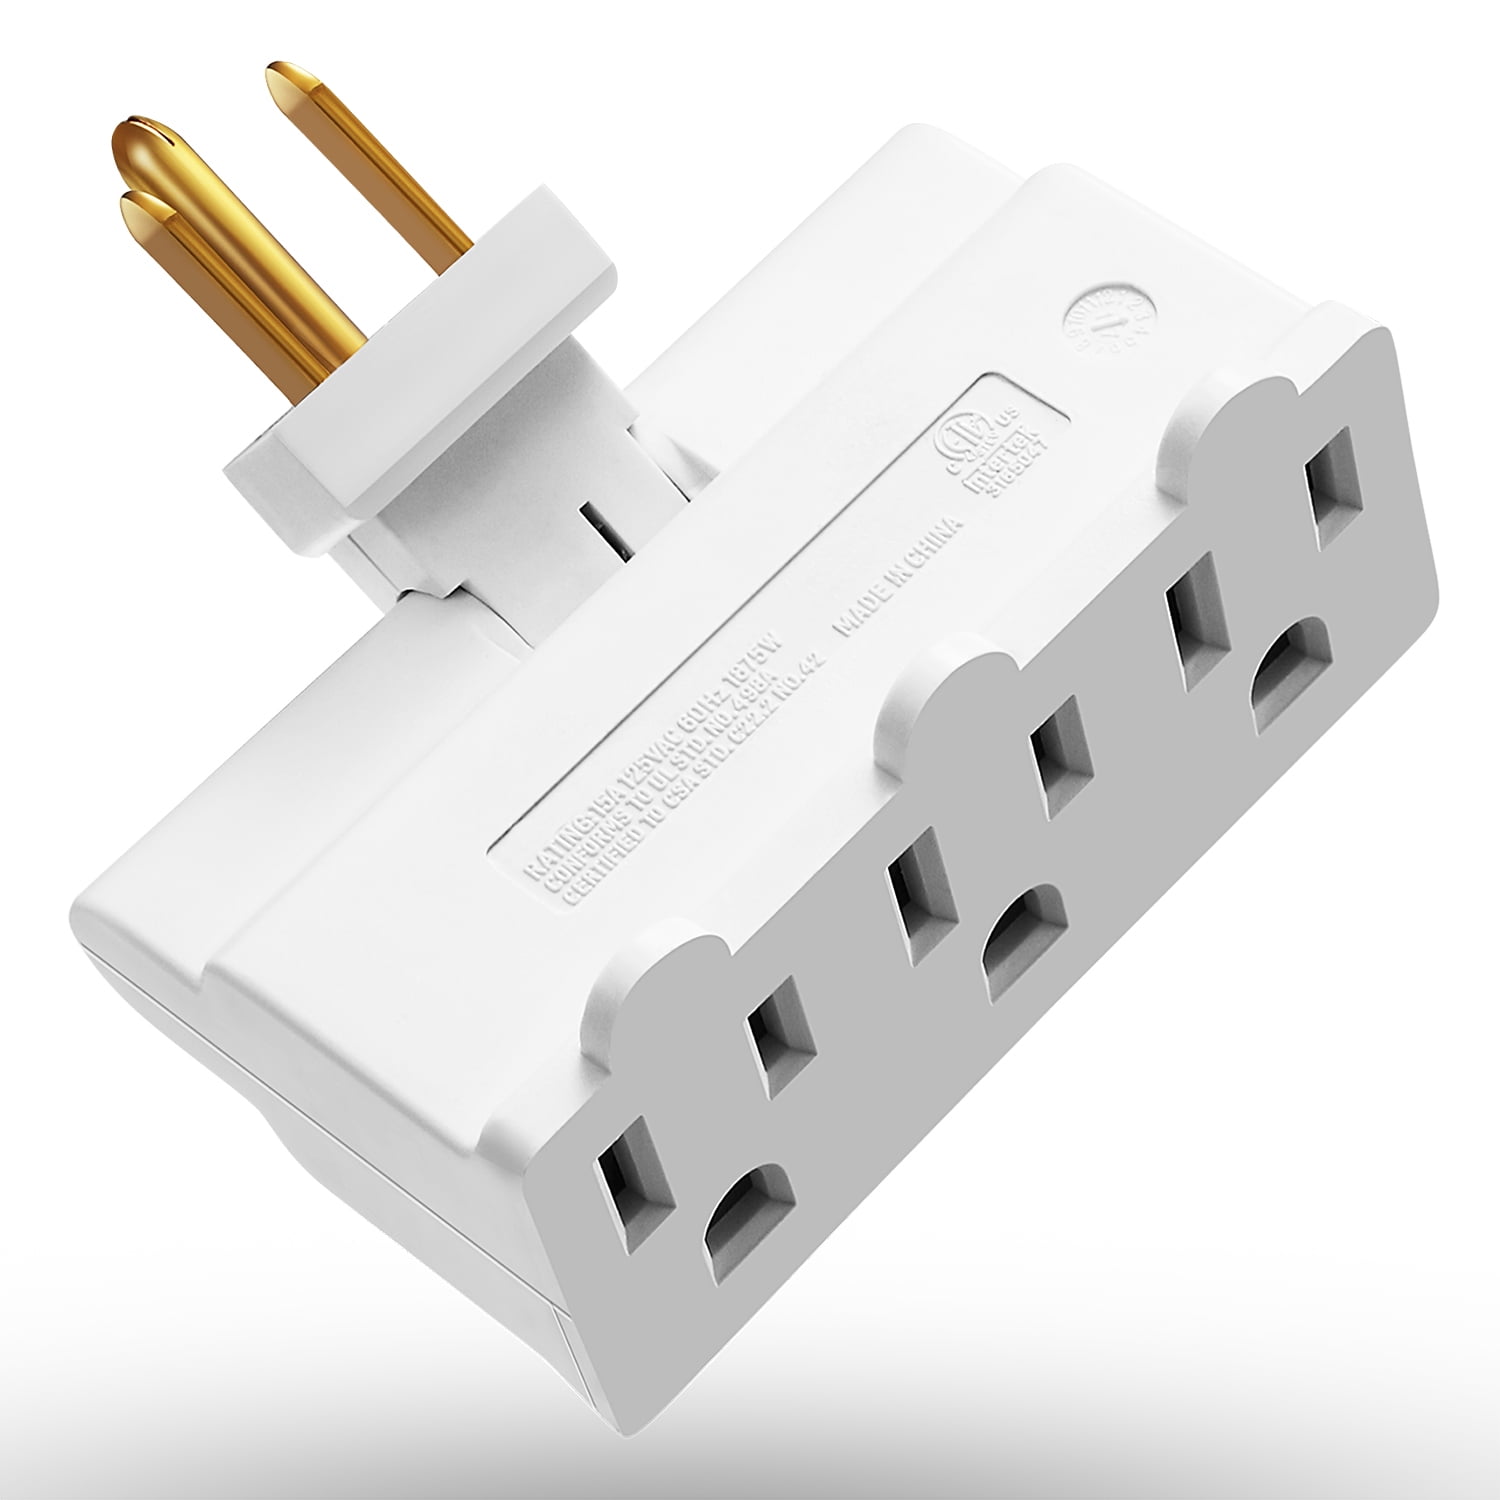 3 Outlet Wall Adapter, Fosmon ETL Listed 3-Prong Swivel Grounded Indoor AC  Mini Plug Wall Outlet Extender Tap (White) 